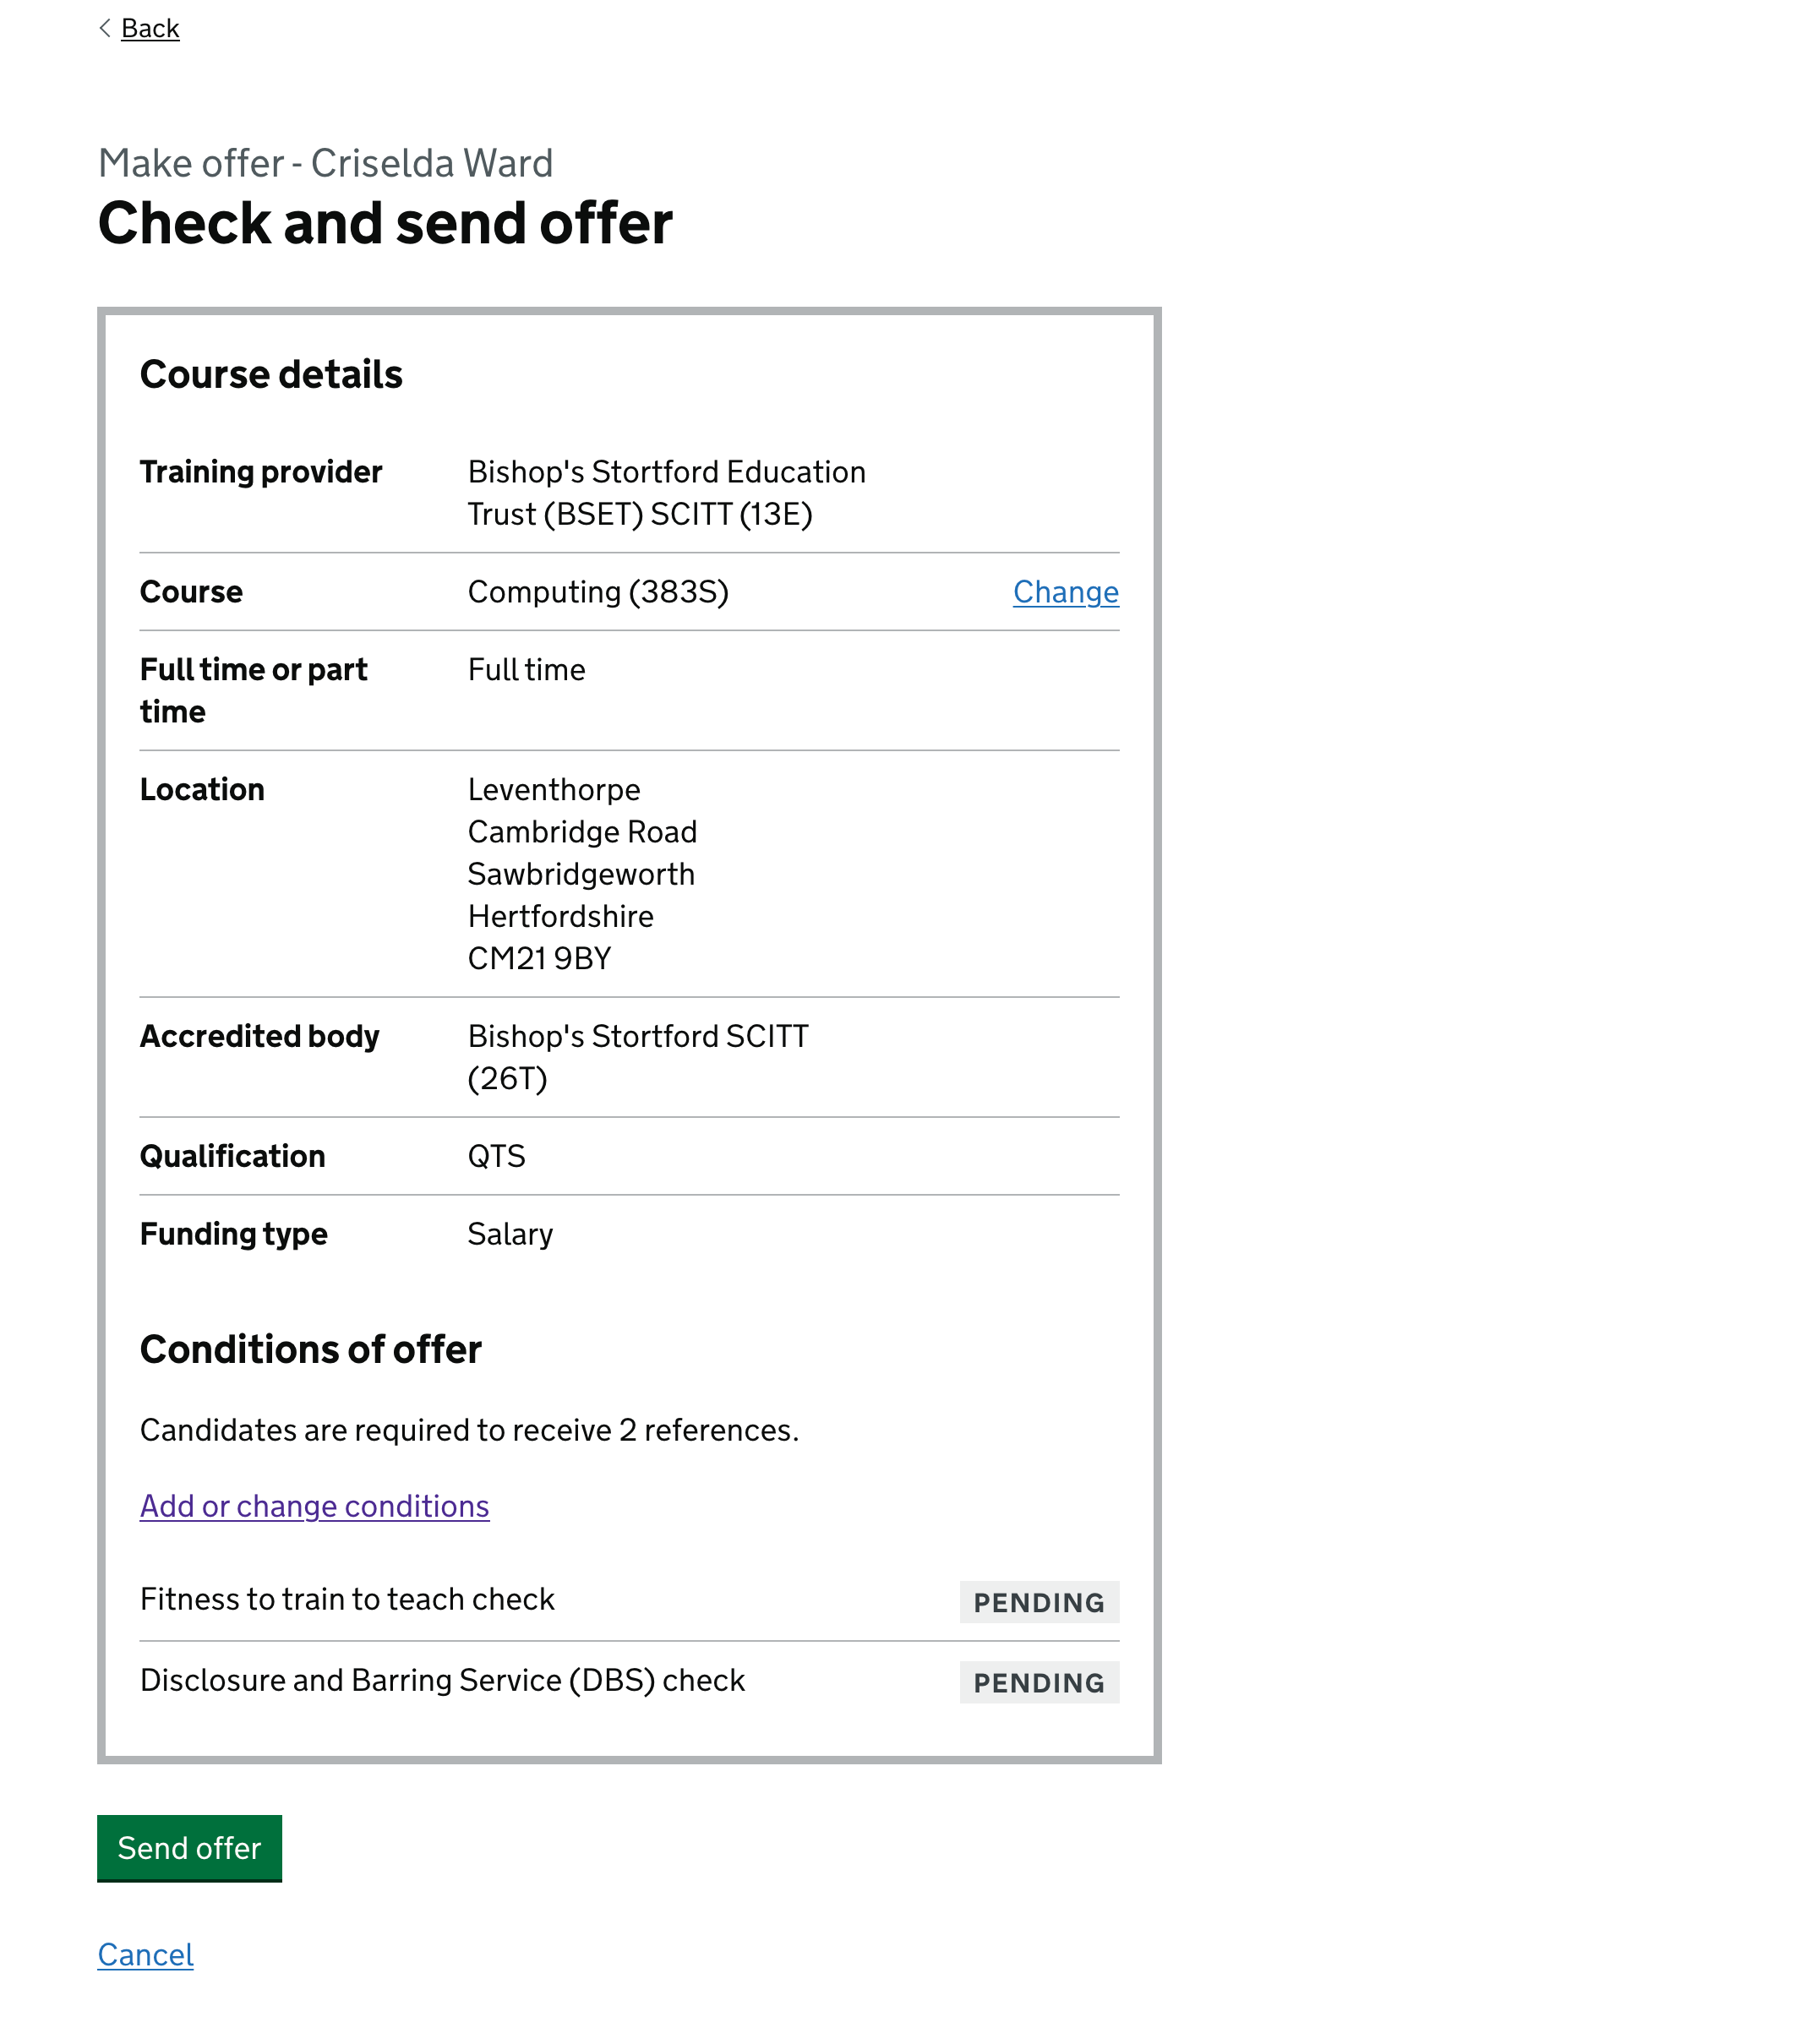 Screenshot of a page with the title ‘Check and send offer’. It includes a box with course details and the conditions of offer. The course details include training provider, course, full time or part time, location, accredited bodt, qualification and funding type. The conditions of offer section mentions that the candidate needs 2 references. It has a link to add or change conditions, followed by the conditions for this offer. At the bottom of the page is a send offer button and a cancel link.